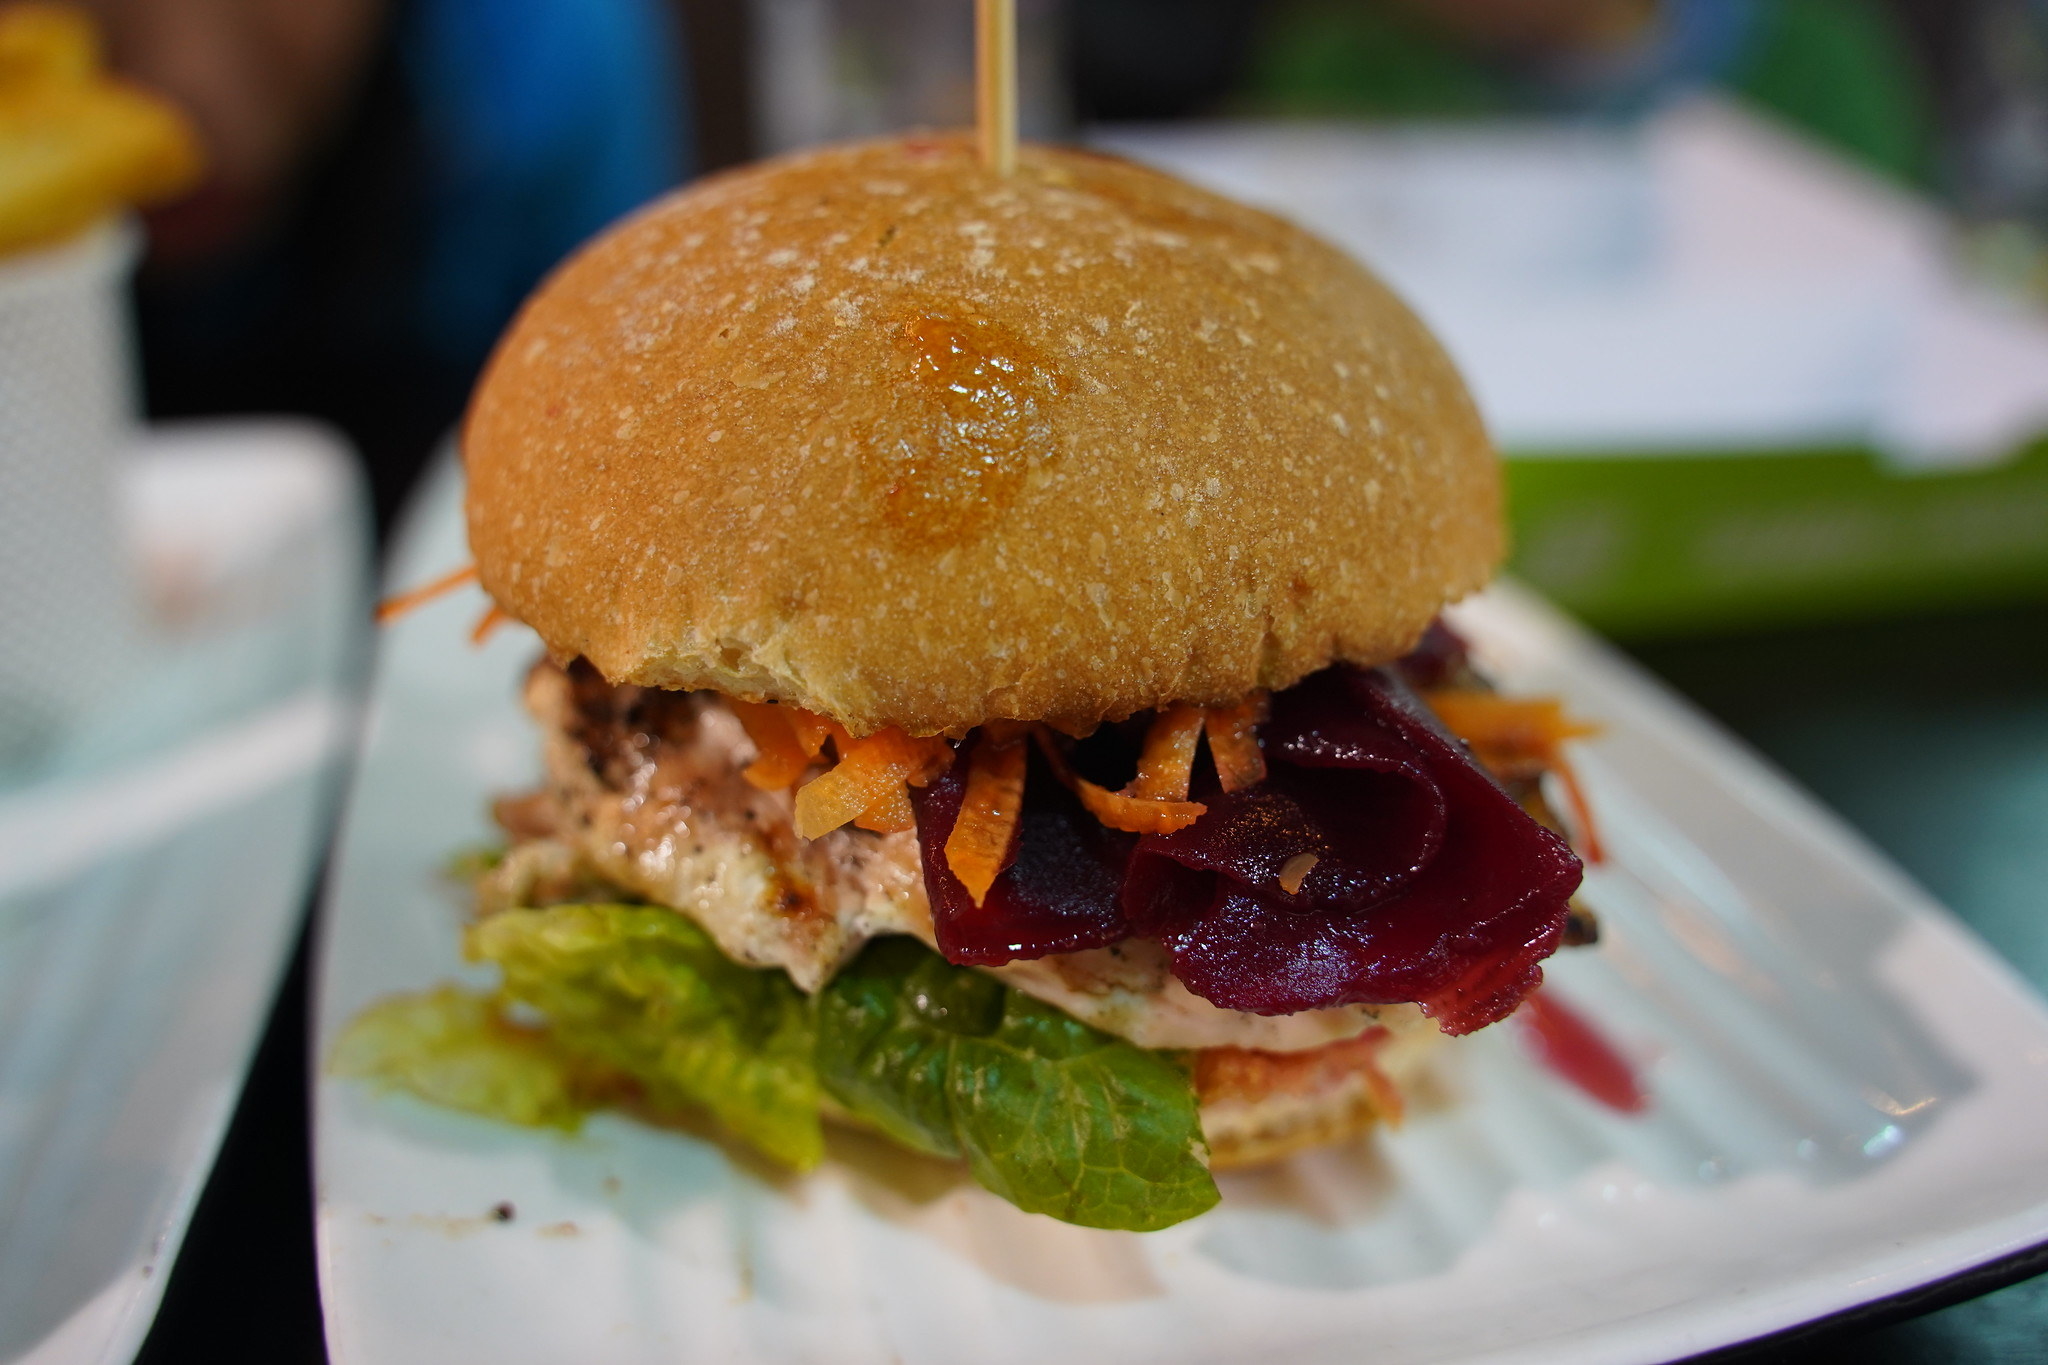 A burger containing beetroot